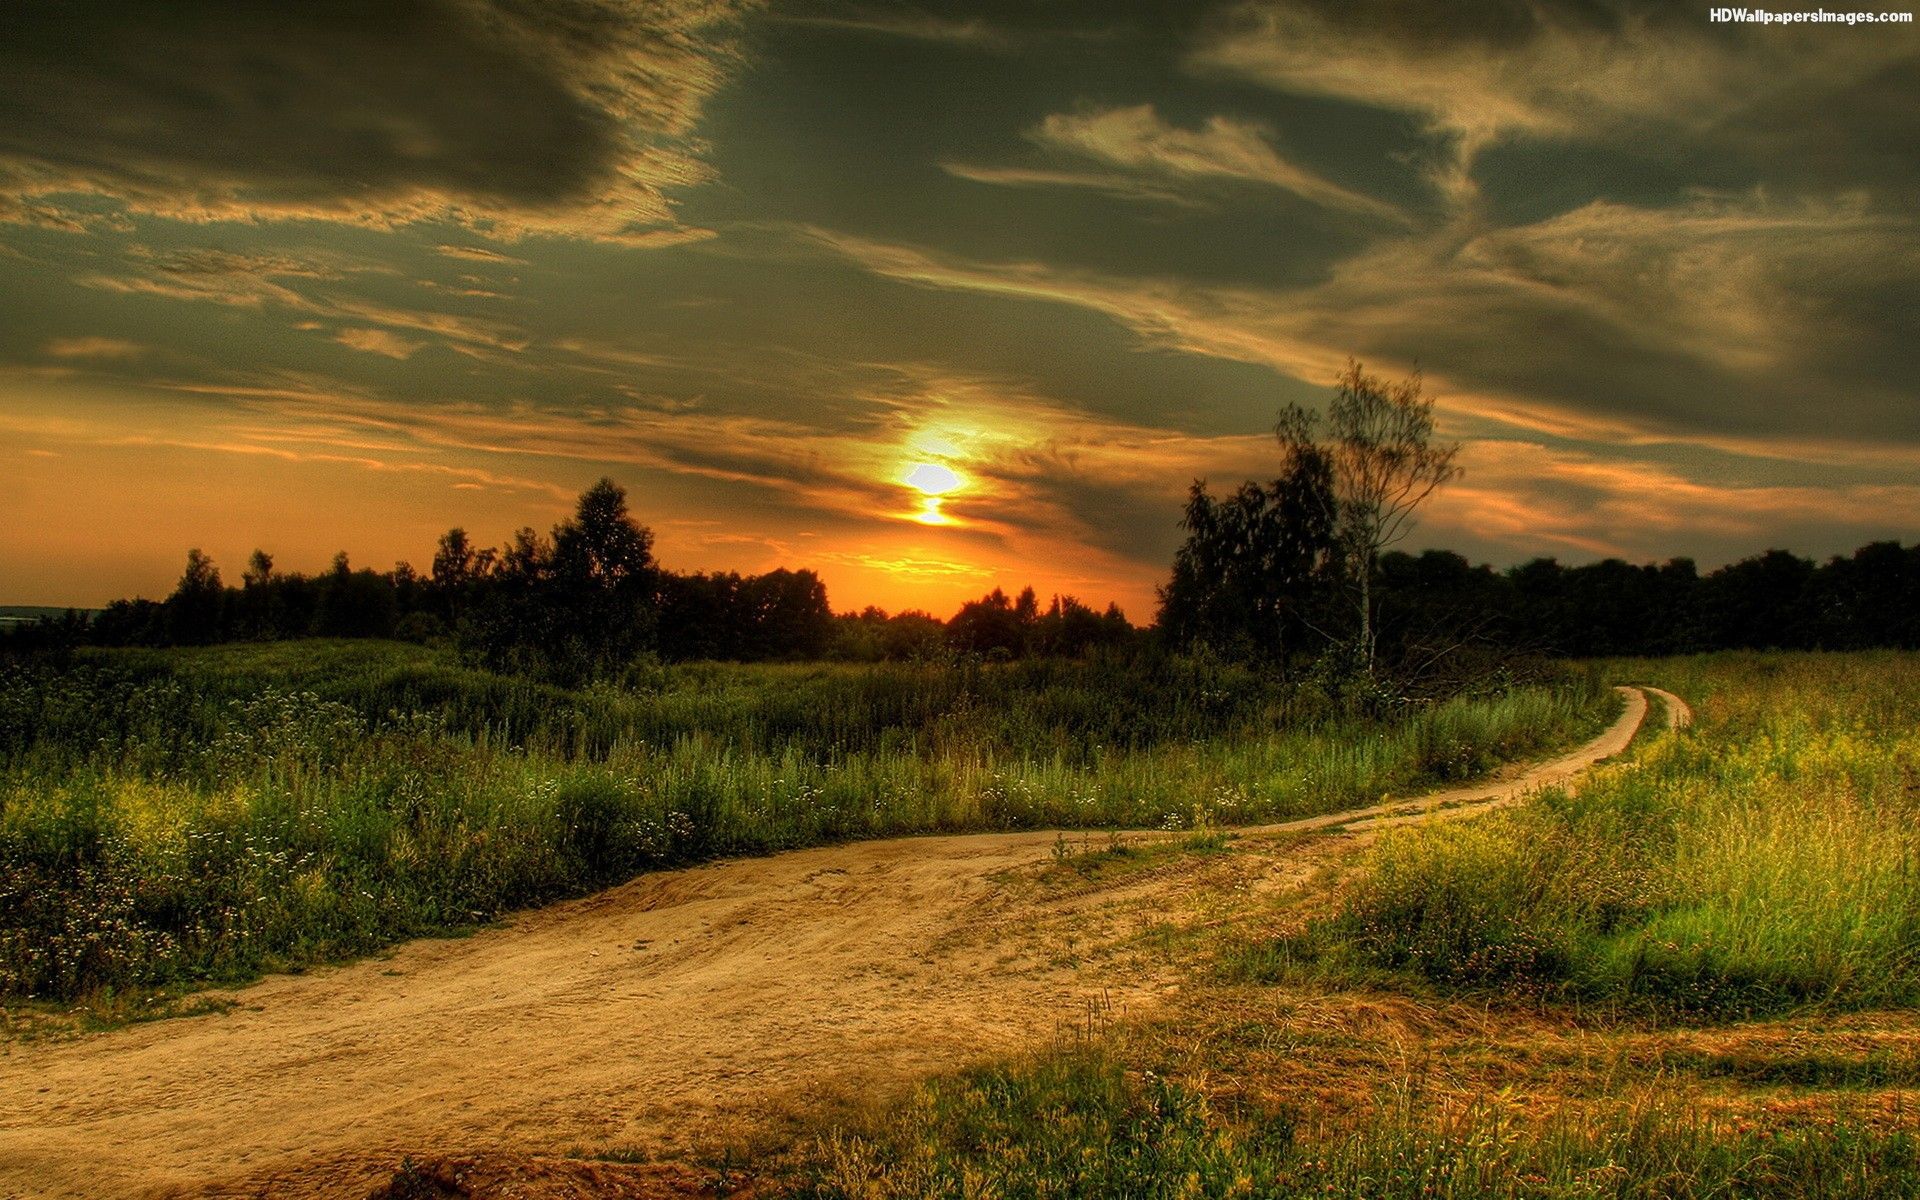 Country Dirt Road At Night Wallpaper (1920×1200). Beautiful Scenery Wallpaper, Sunset Nature, Scenery Picture